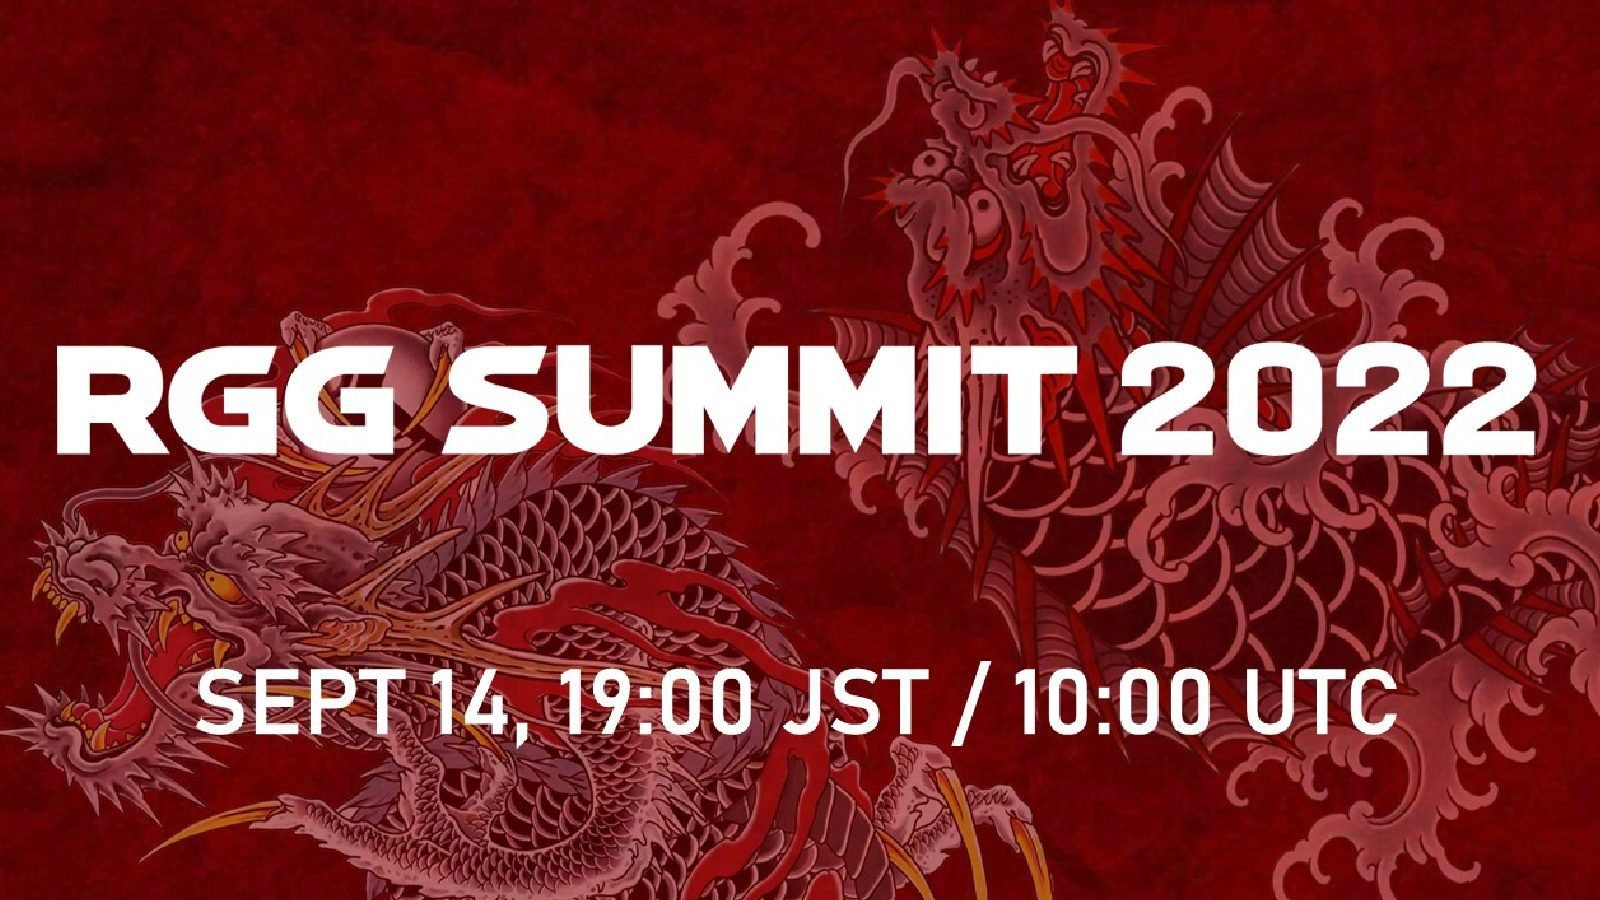 RGG Studio Announces RGG Summit Event on September 14th